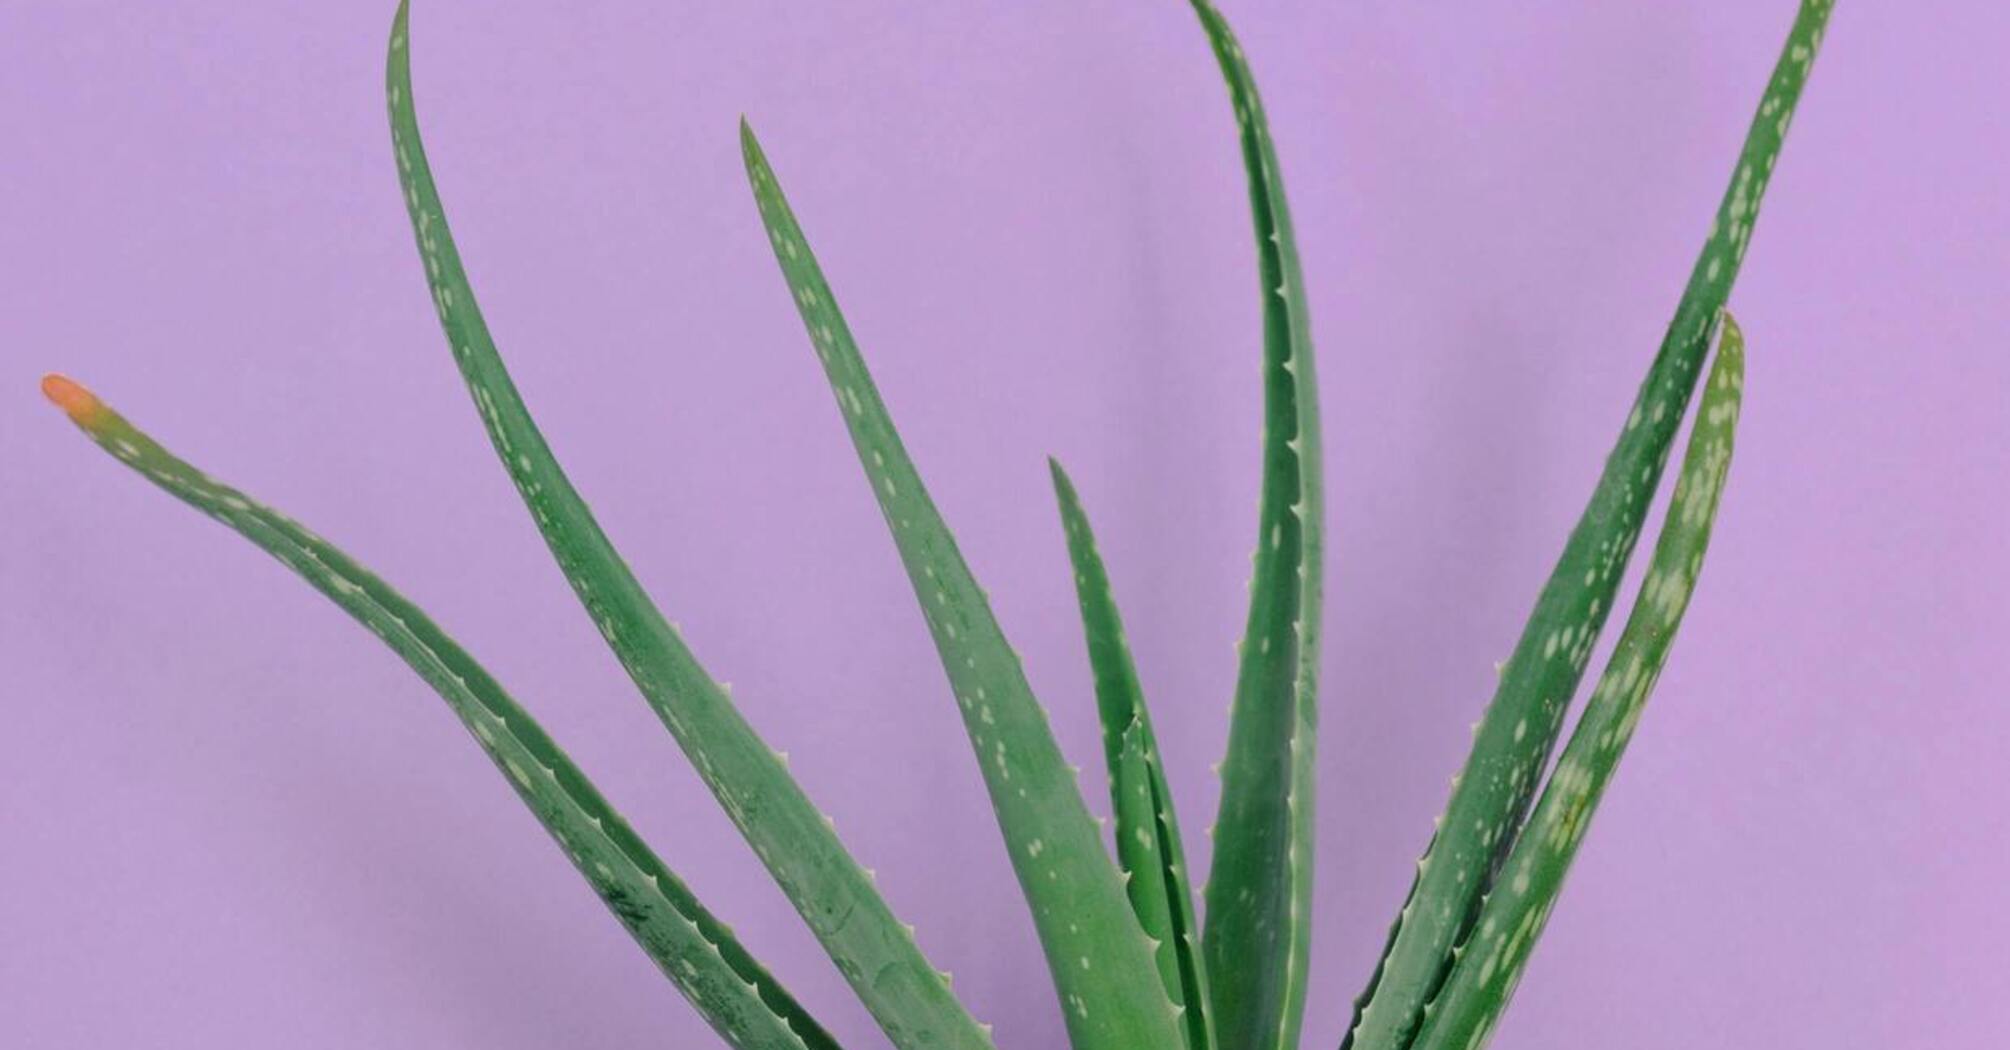 What plants can destroy mold and provide fresh air in the home